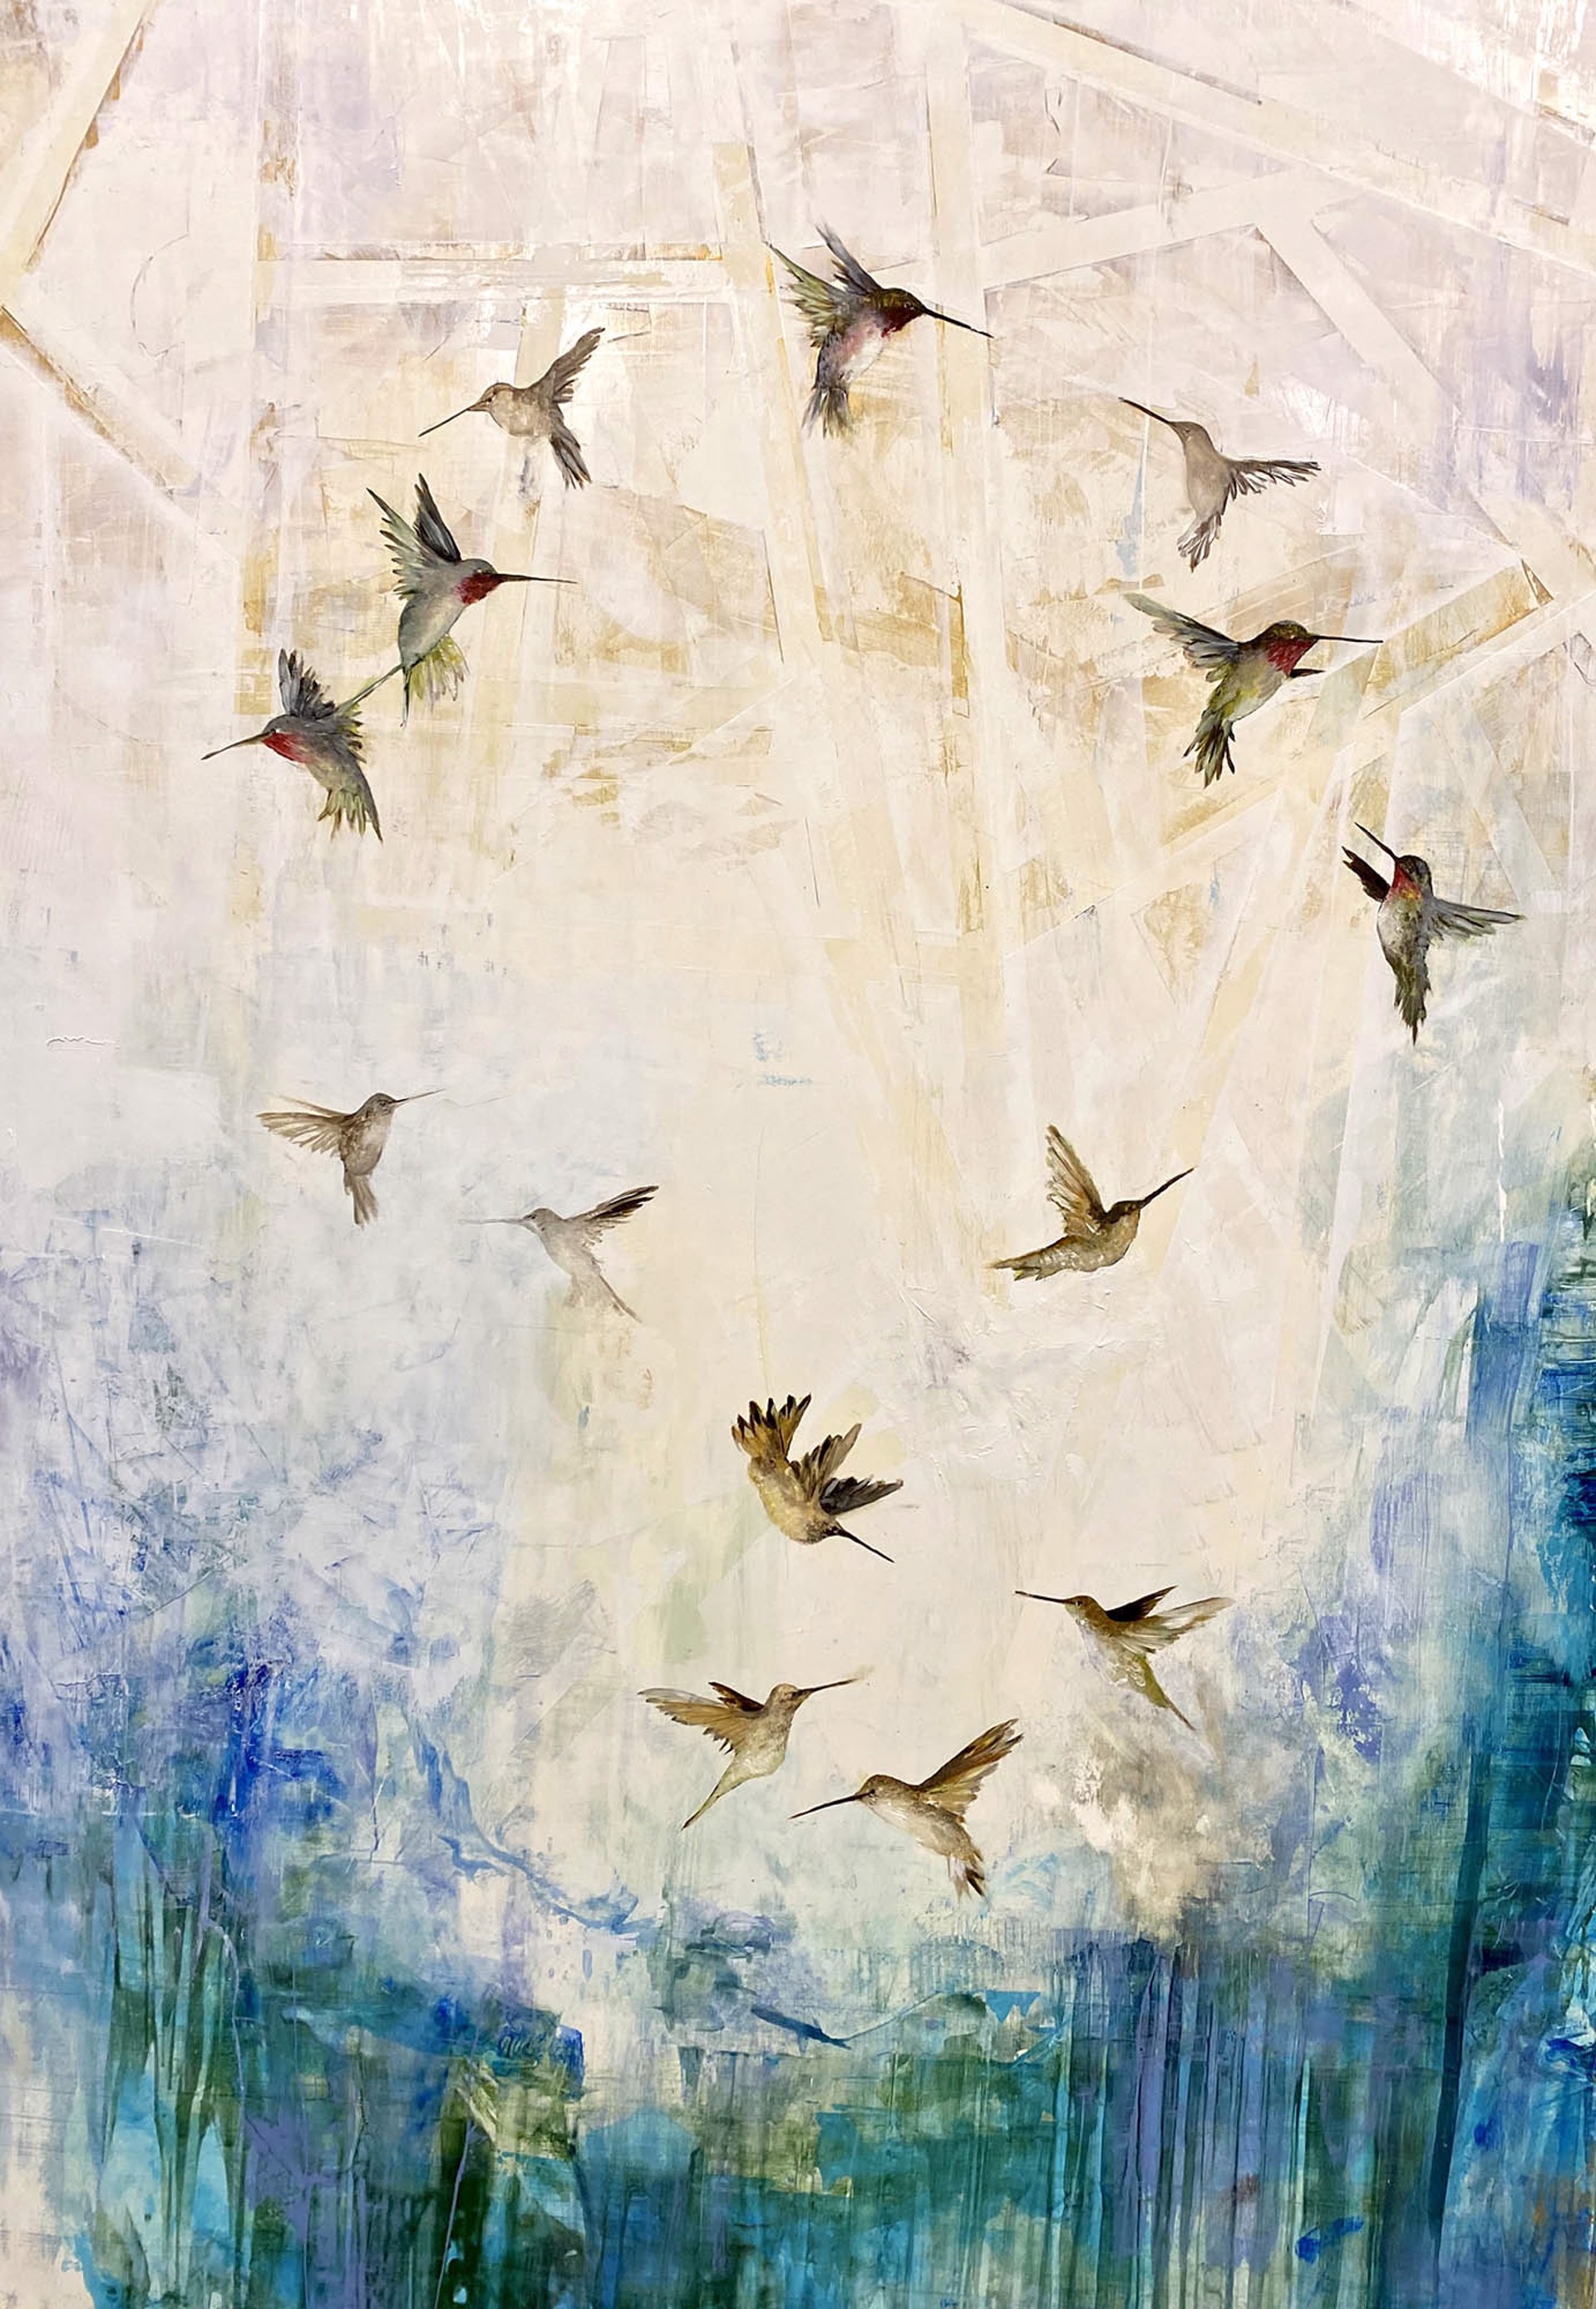 An Oil Painting Of Many Humming Birds In Flight On A Contemporary Abstract Blue And Cream Background With Random Faint Lines, By Jenna Von Benedikt